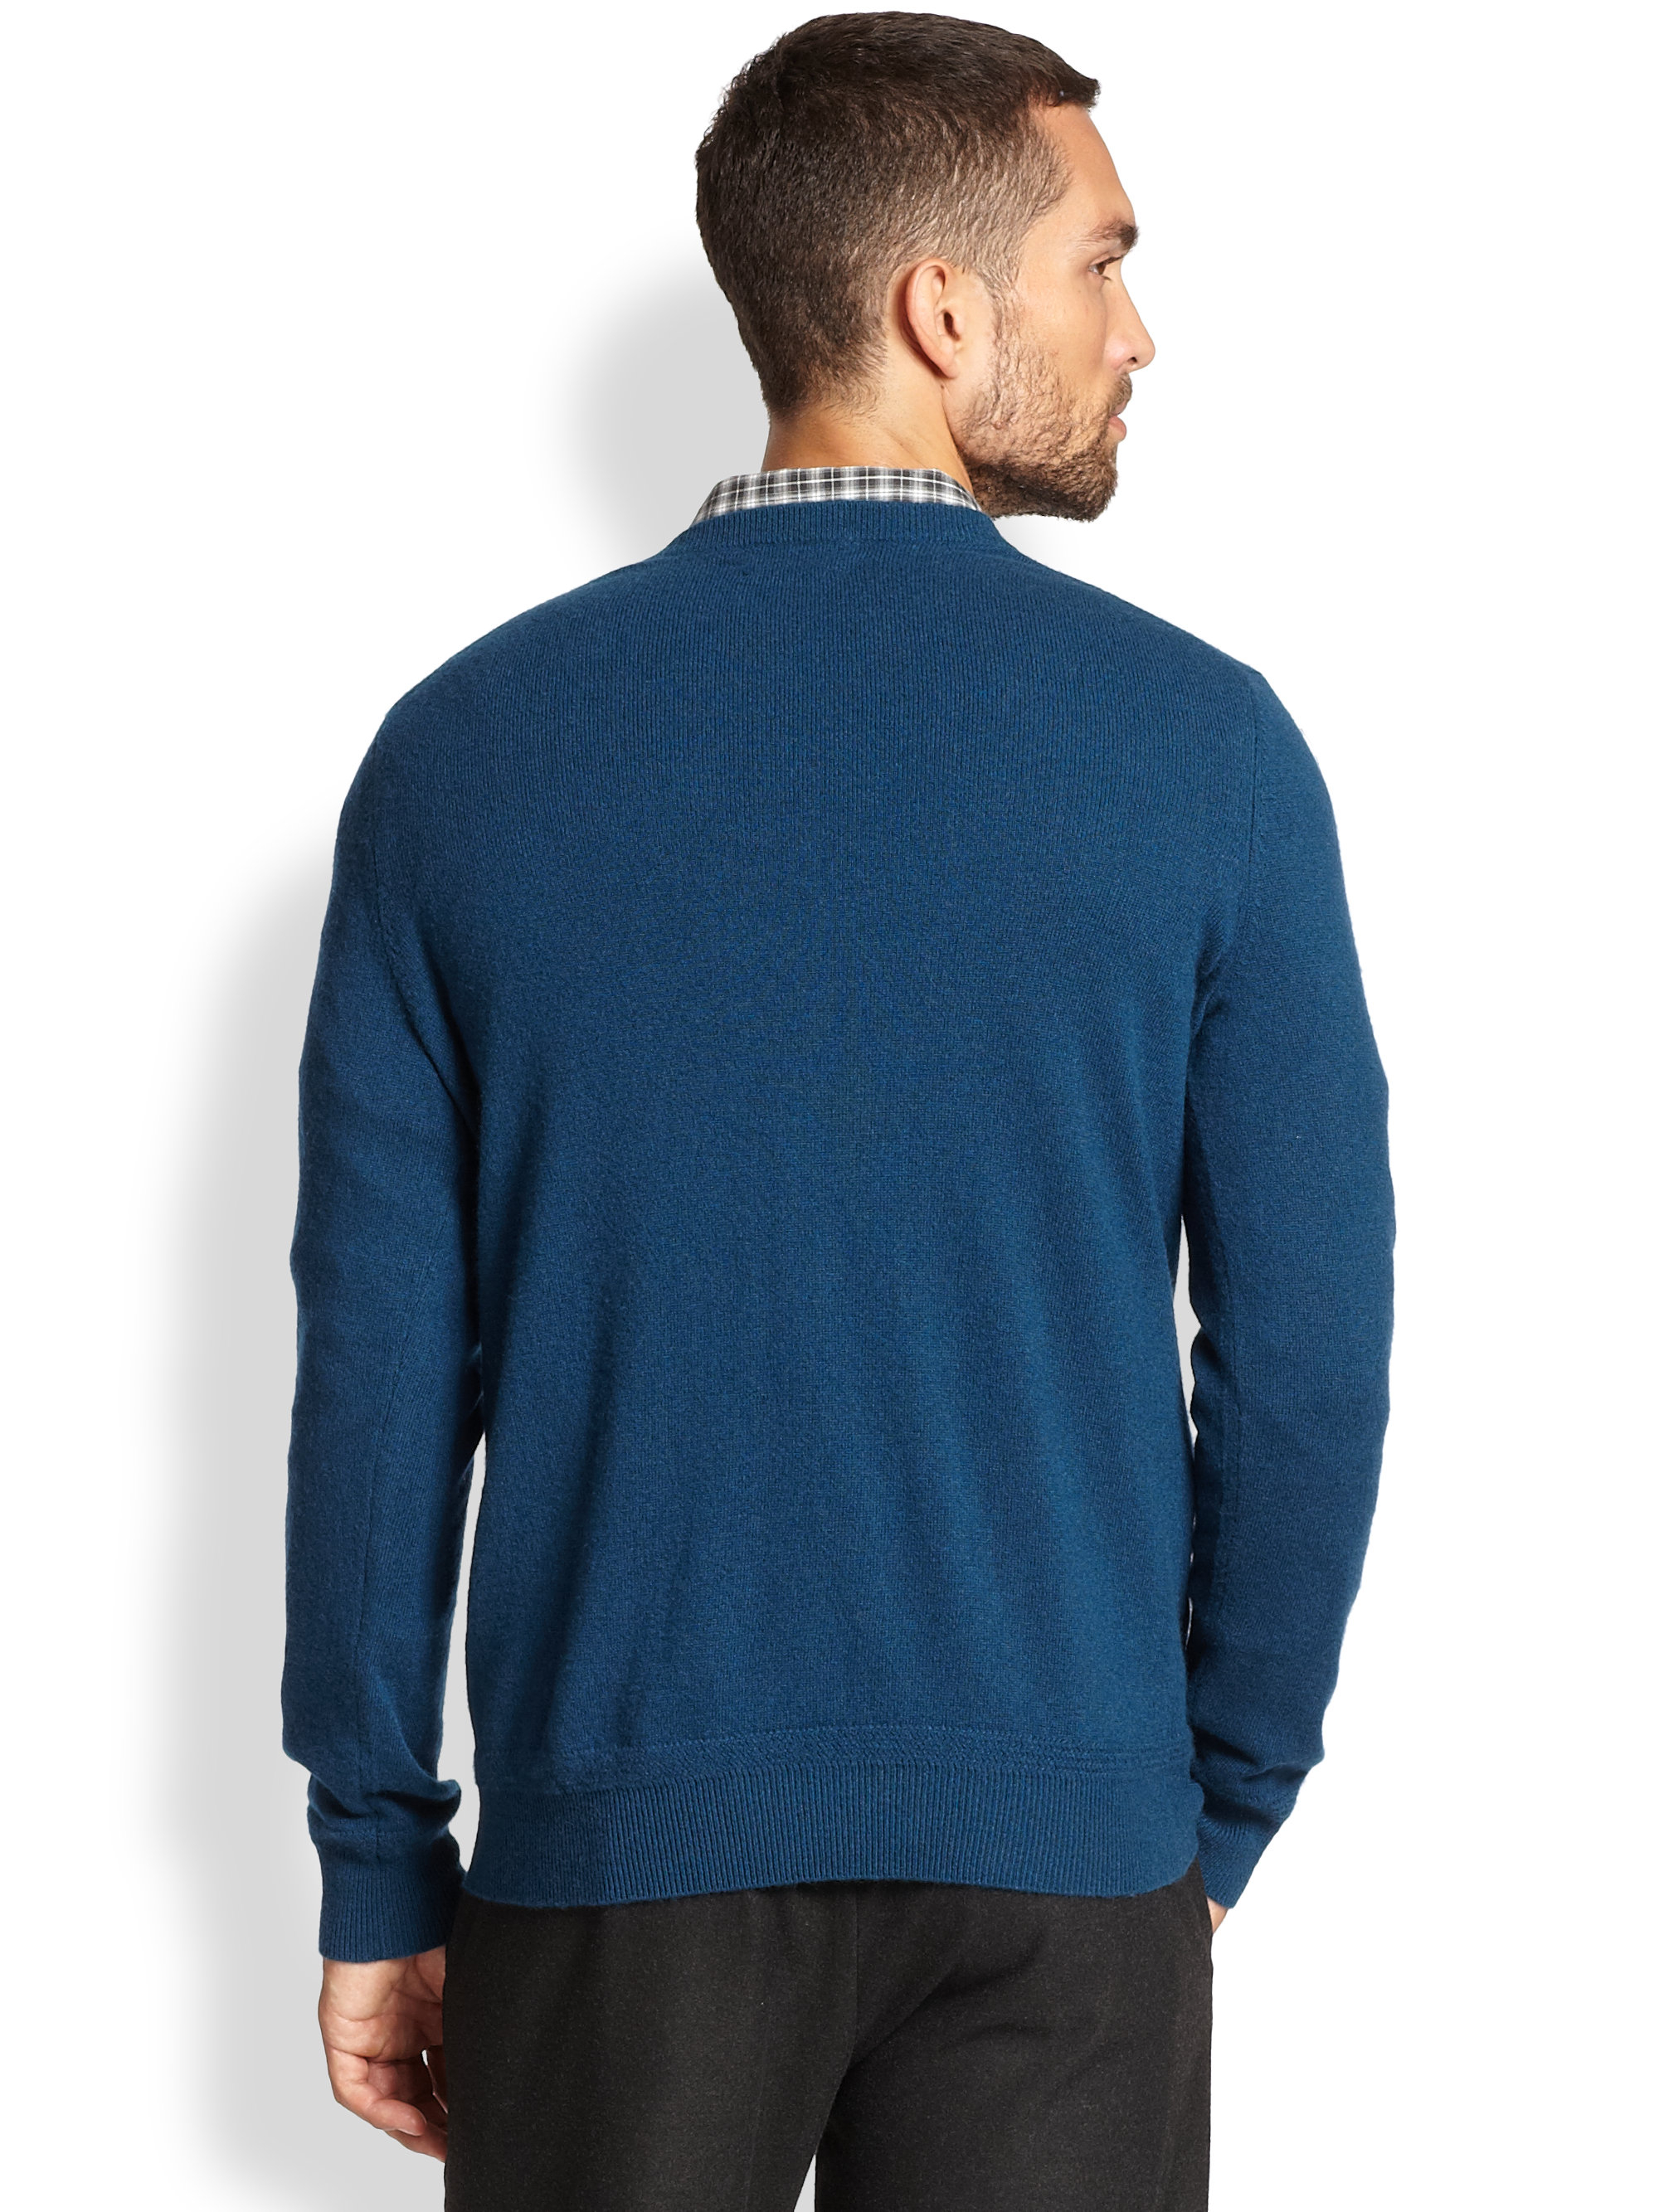 vince mens sweater